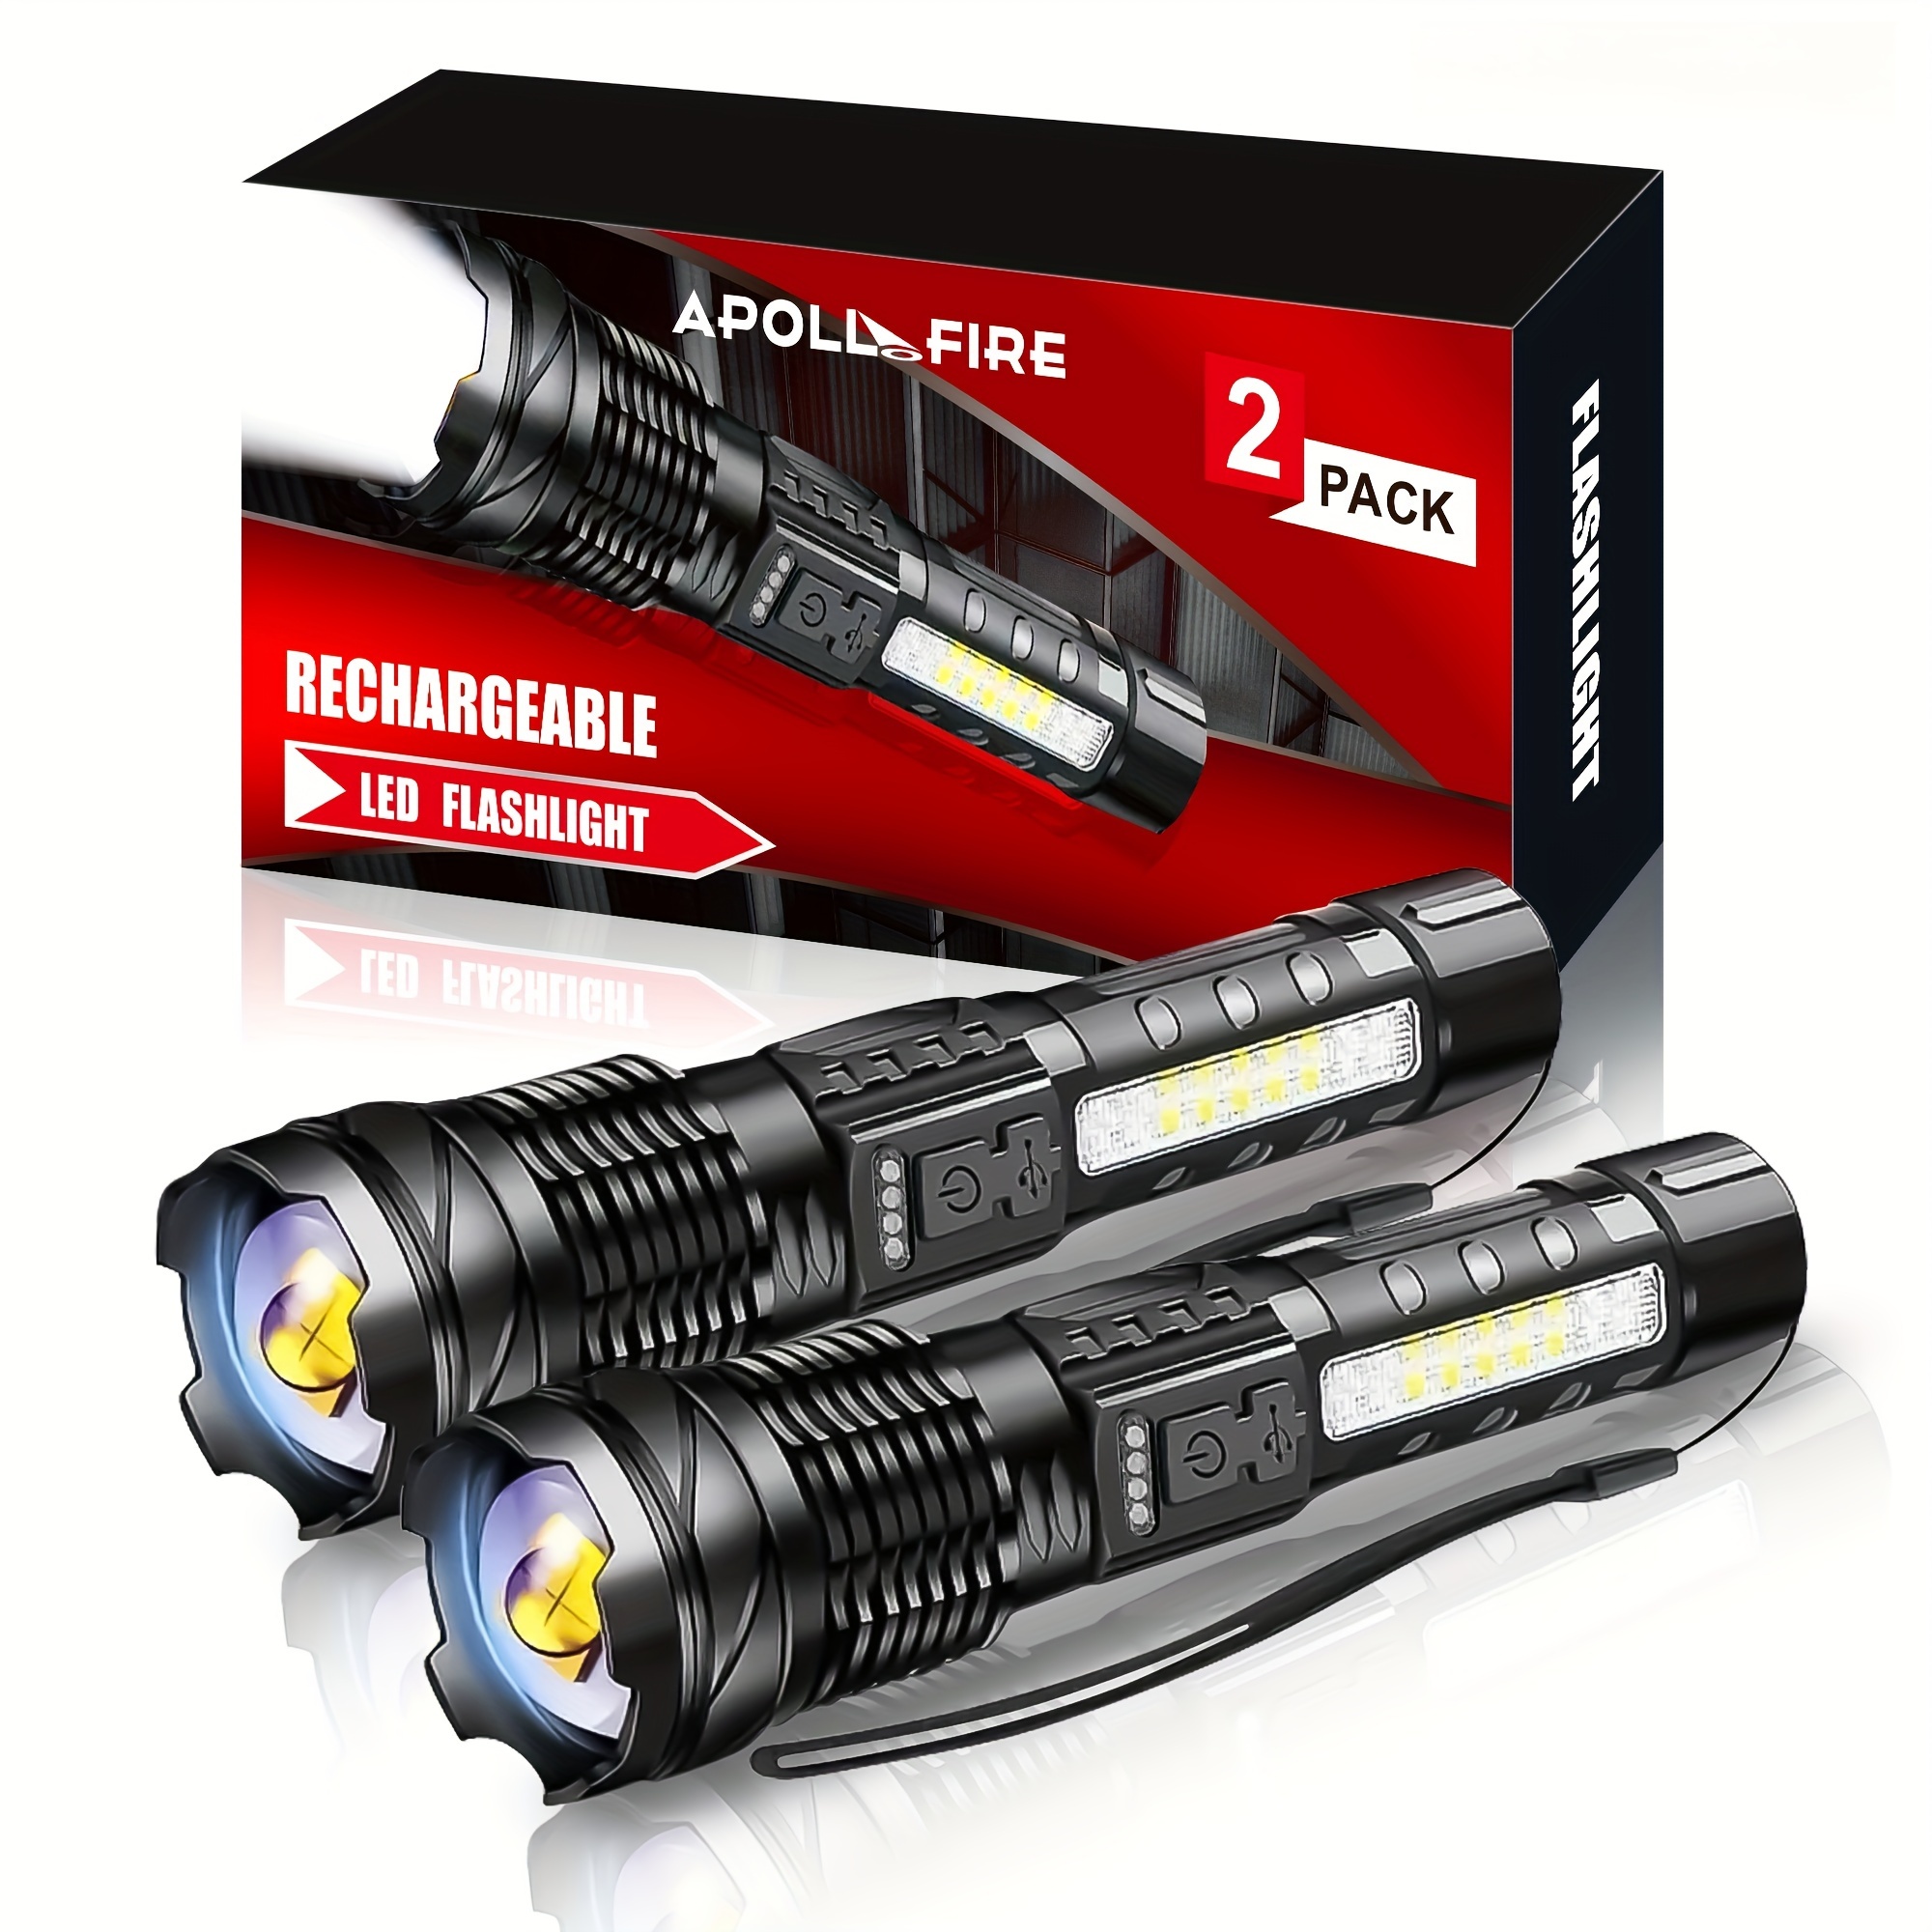 

1pc/2pcs Led Rechargeable Flashlights With 1500 Mah Battery, Red, Blue & White Tricolour Side Light, 7 Lighting Modes And Adjustable Focus, Flashlight For Camping, Fishing, Outdoor & Emergencies